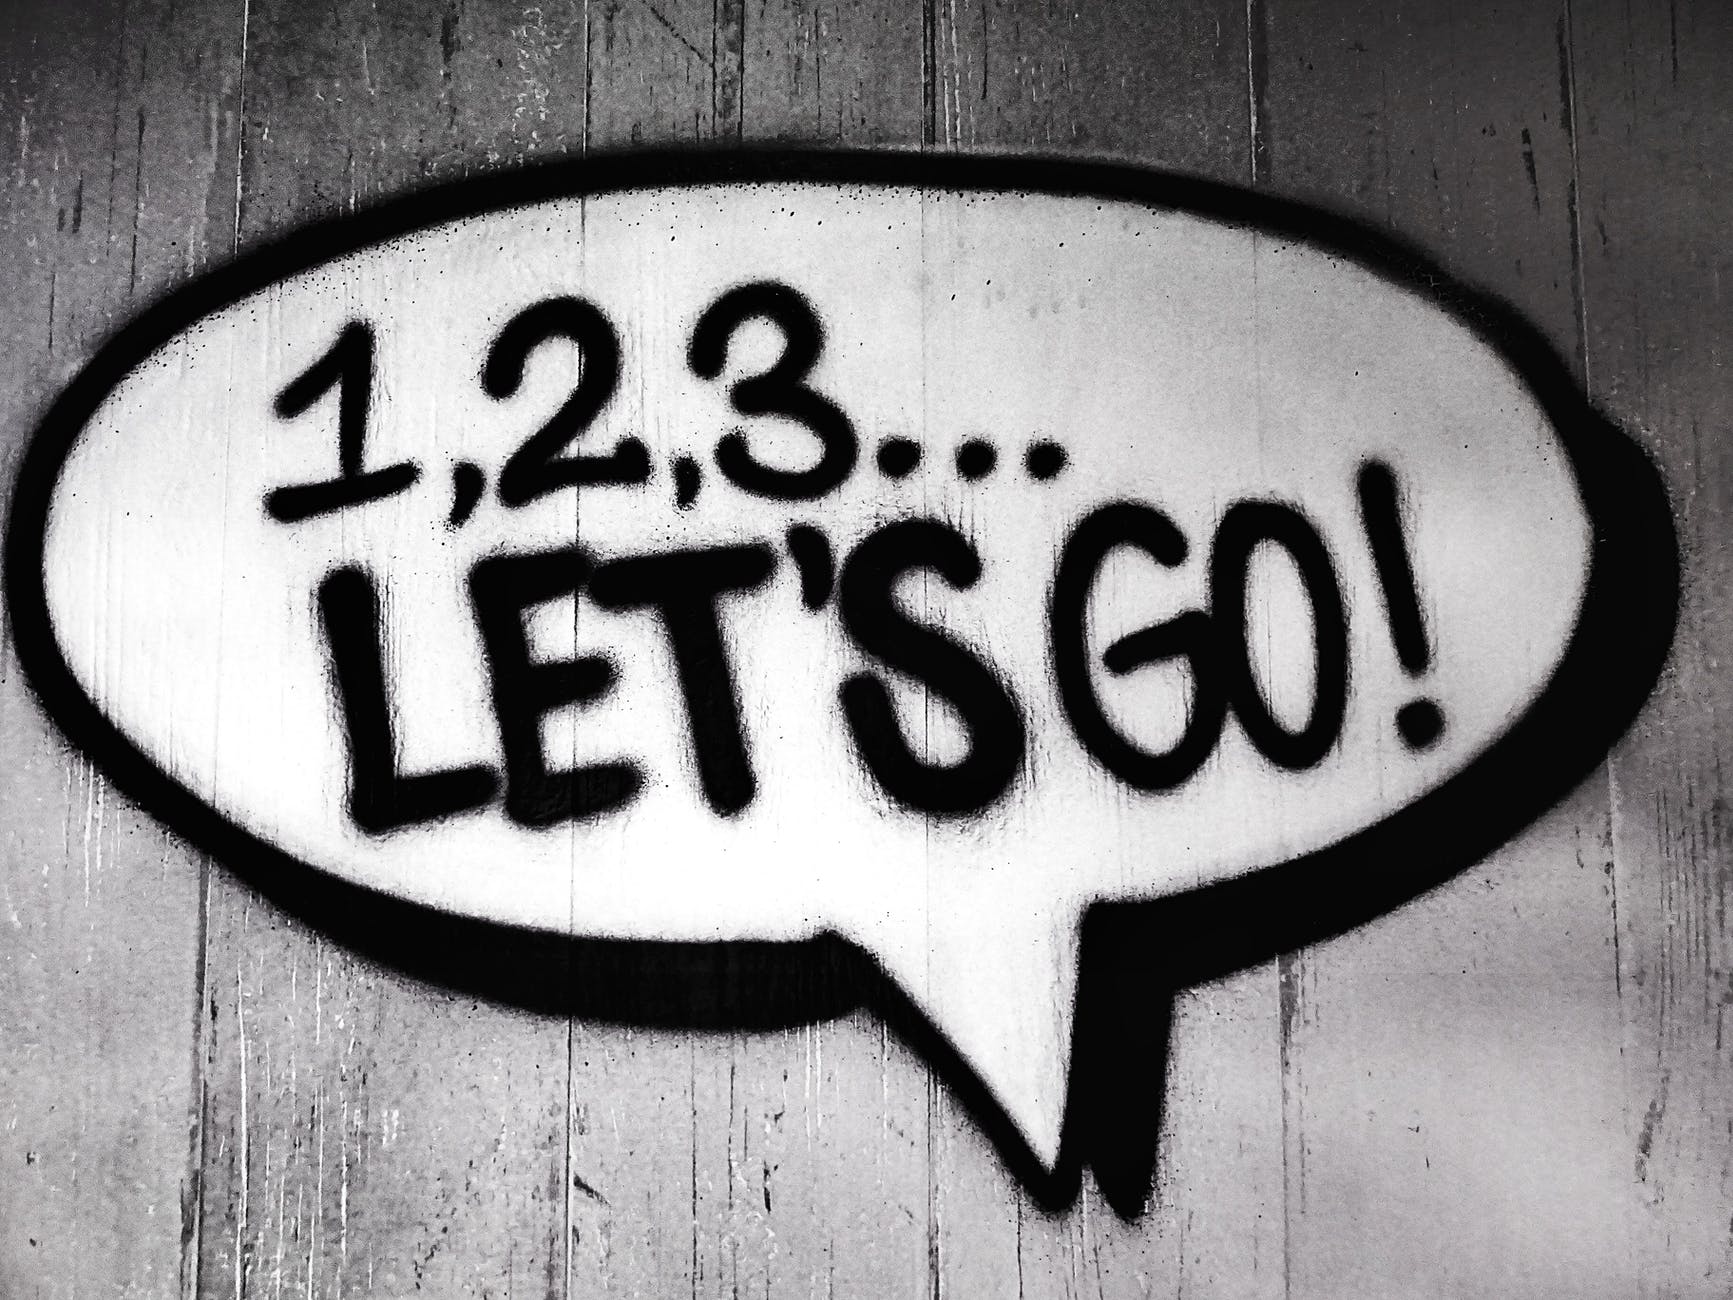 Spray painted speech bubble with '1, 2, 3 let's go!'